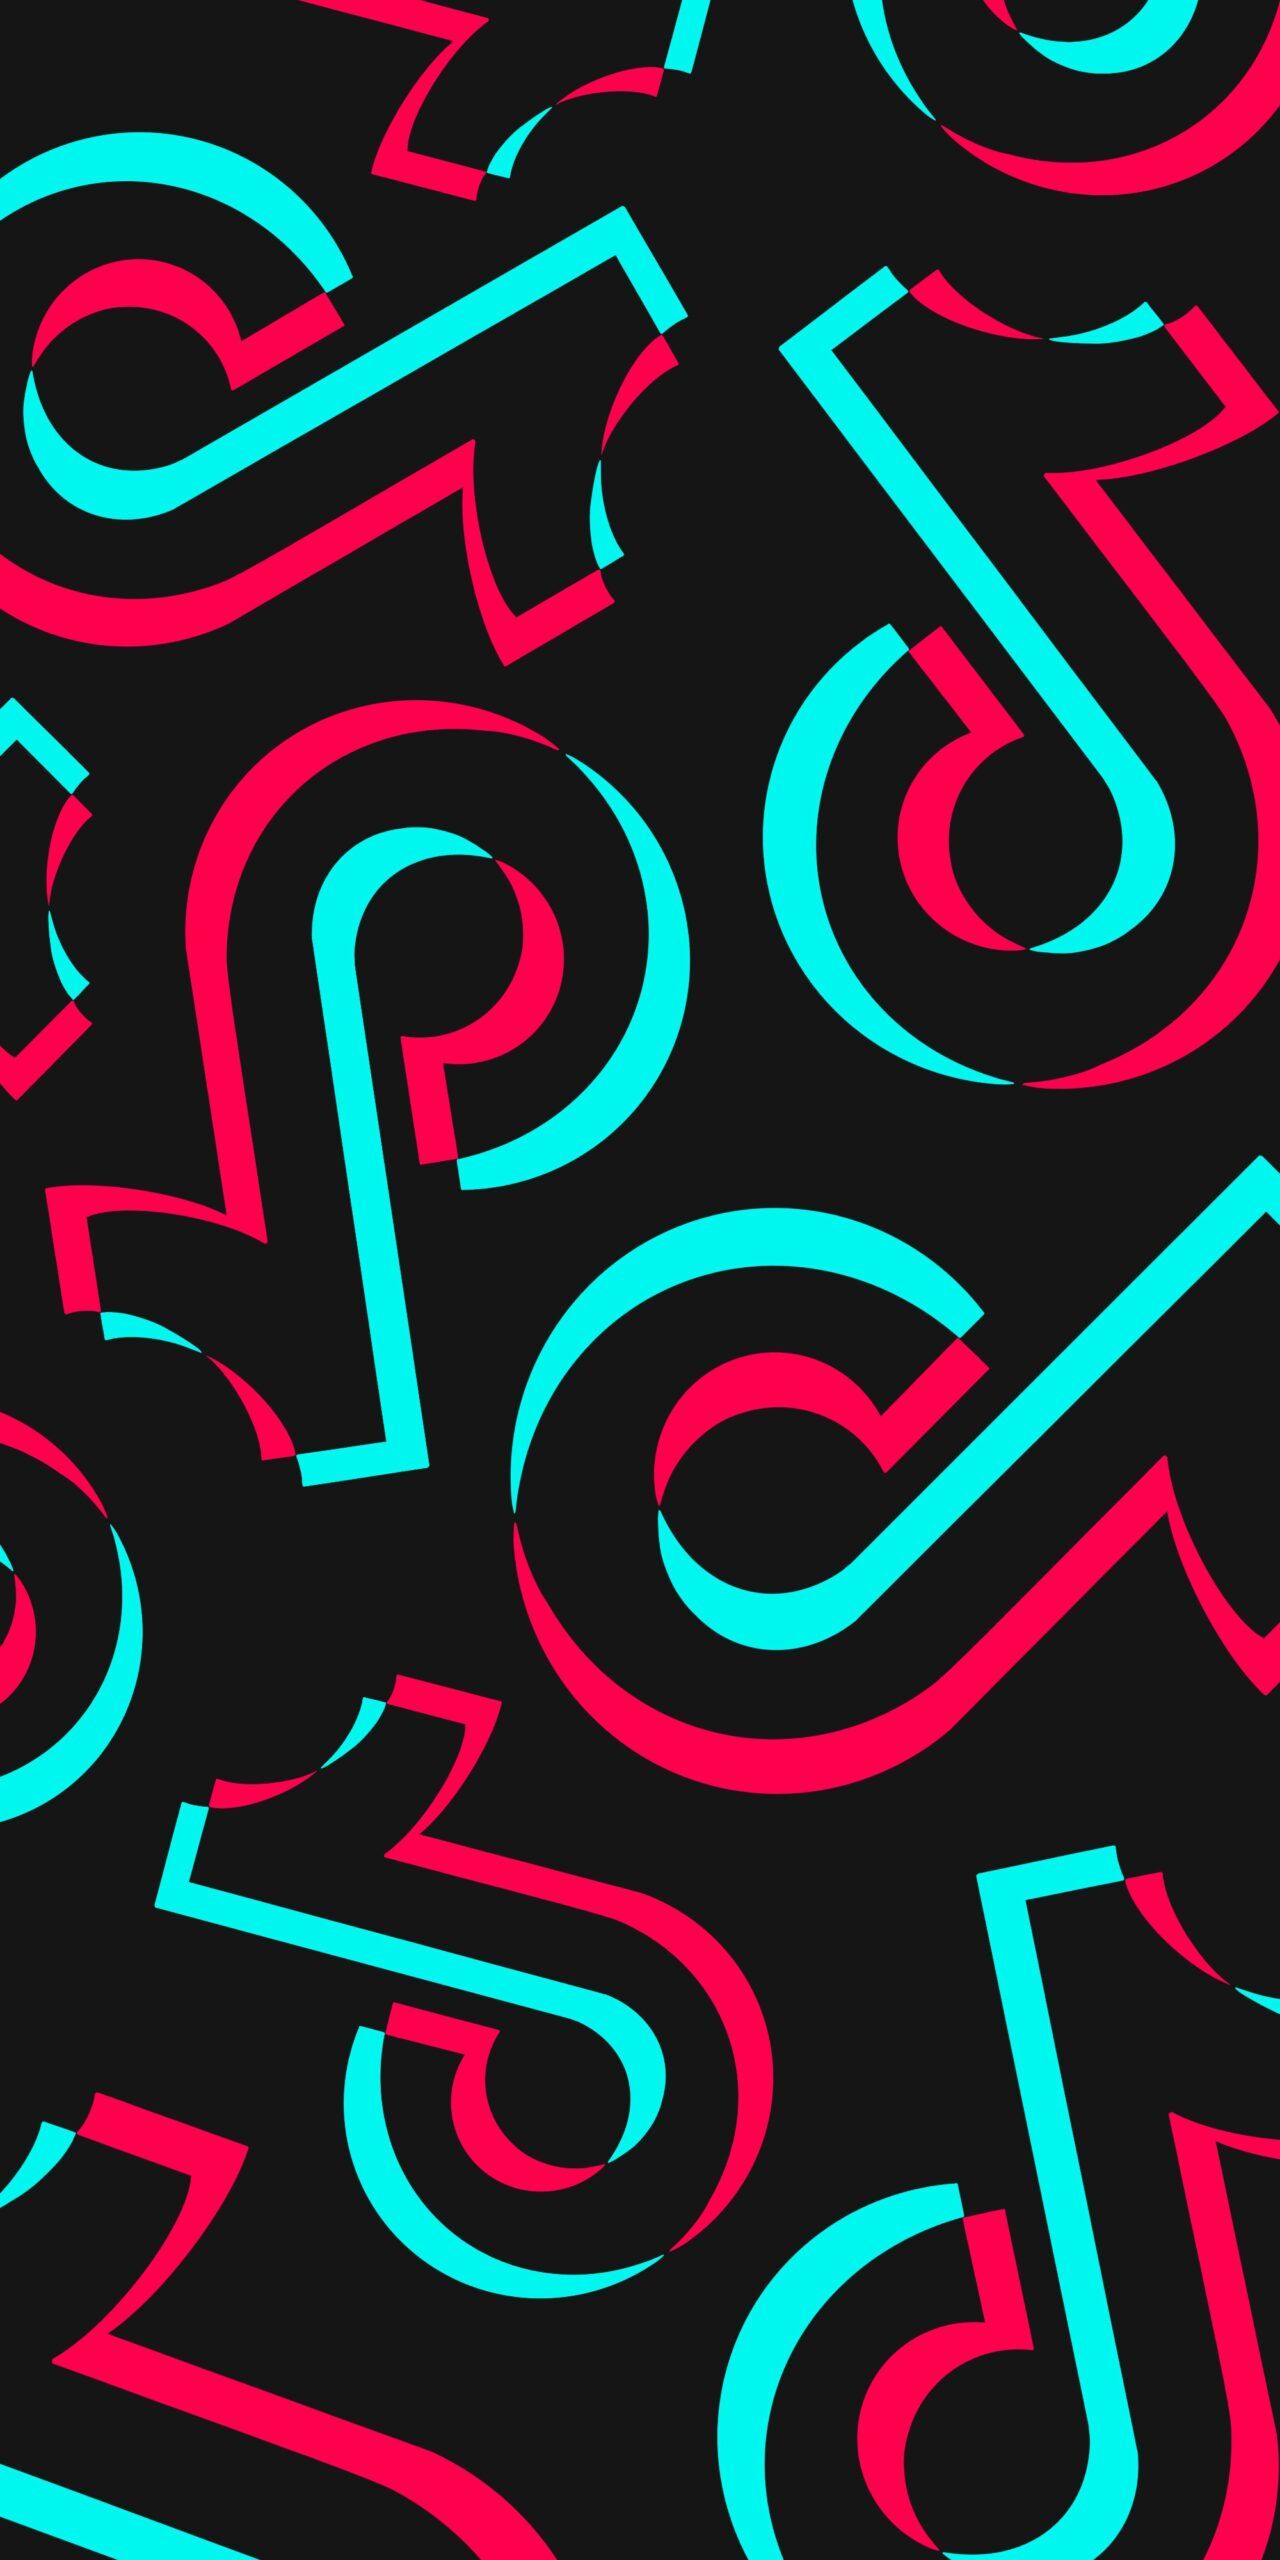 A pattern of the TikTok logo in red and blue on a black background - TikTok